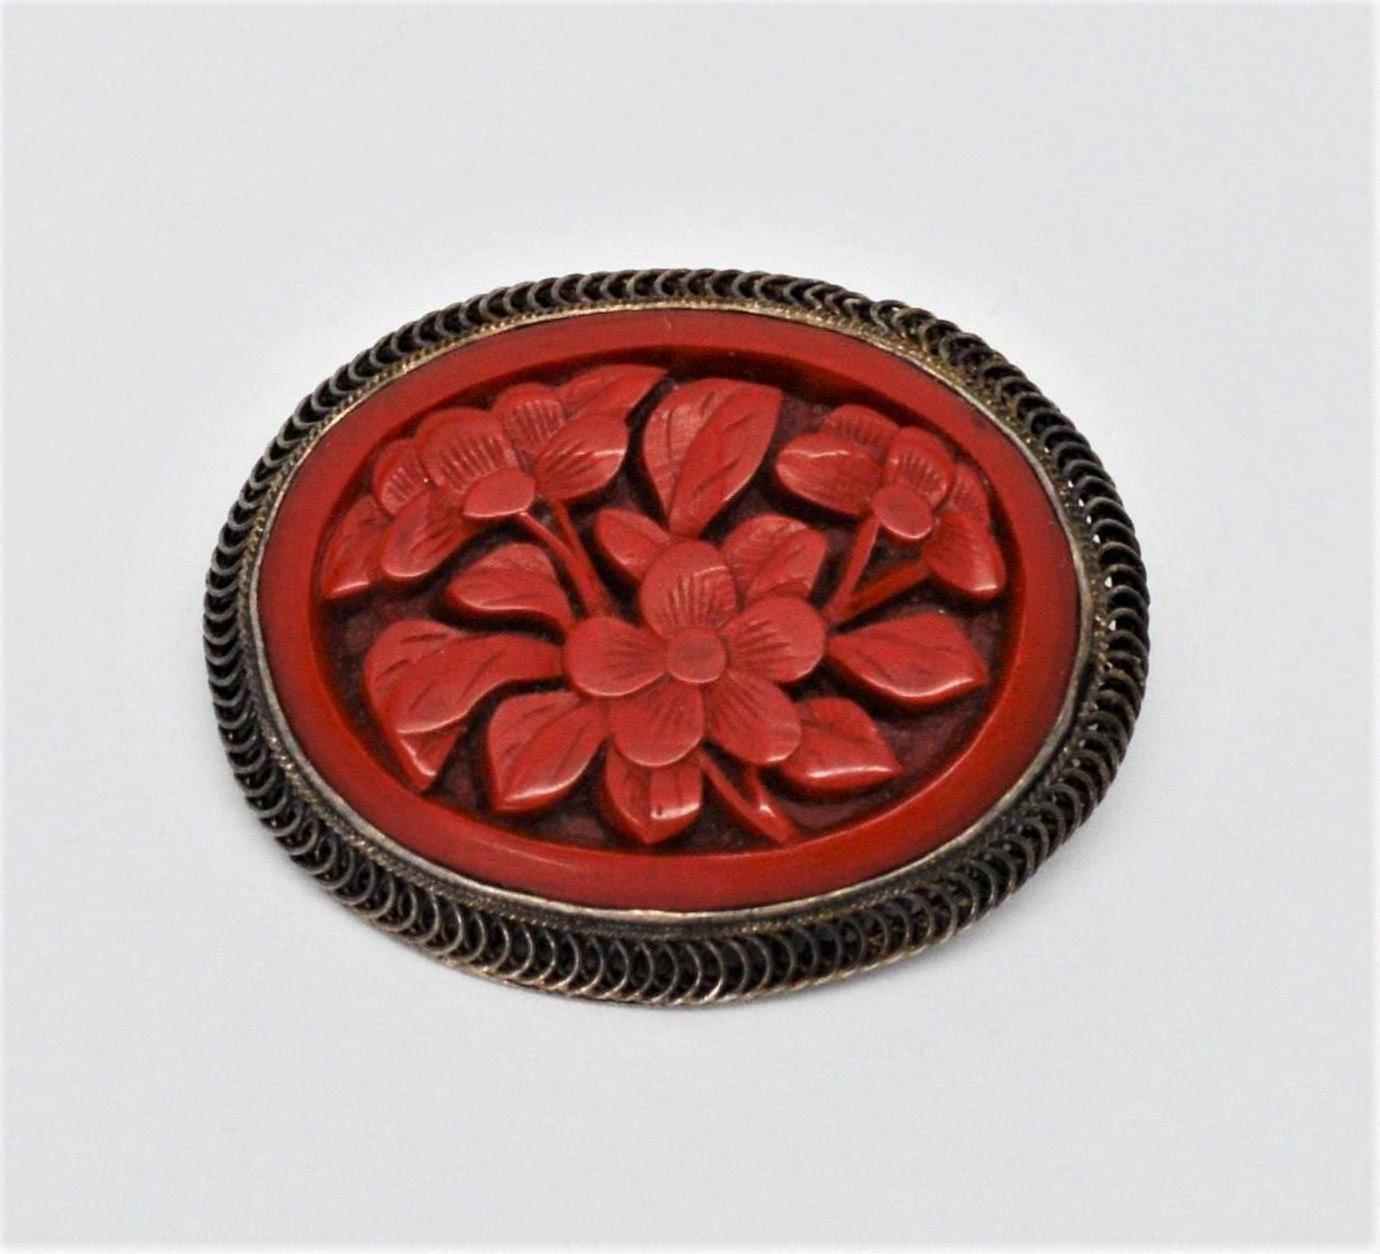 Beautifully carved in natural coral, this artisan brooch has warm heirloom appeal. Framed in sterling silver, the hand tooled oval measures 1-3/8 x 1-1/8 inches. This antique brooch can be worn horizontally or vertically and is outfitted with